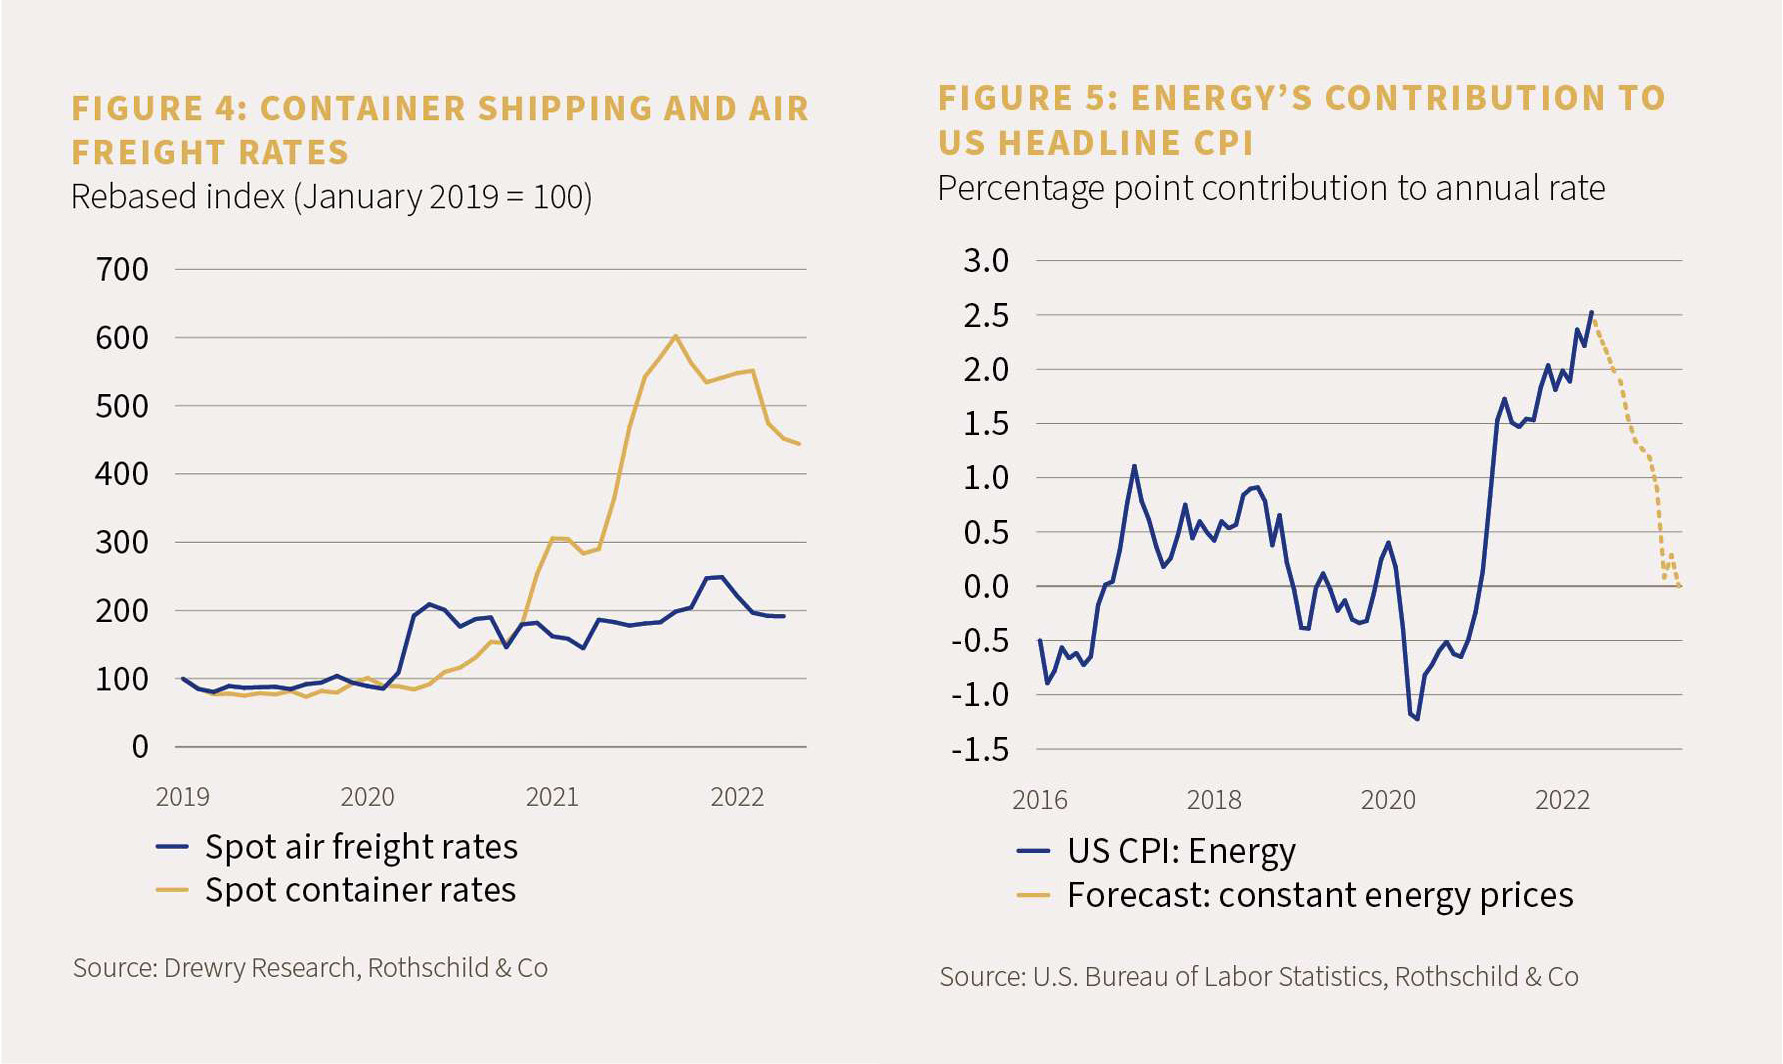 Chart 4 showing container shipping and air freight rates and chart 5 showing energy's contribution to US headline CPI